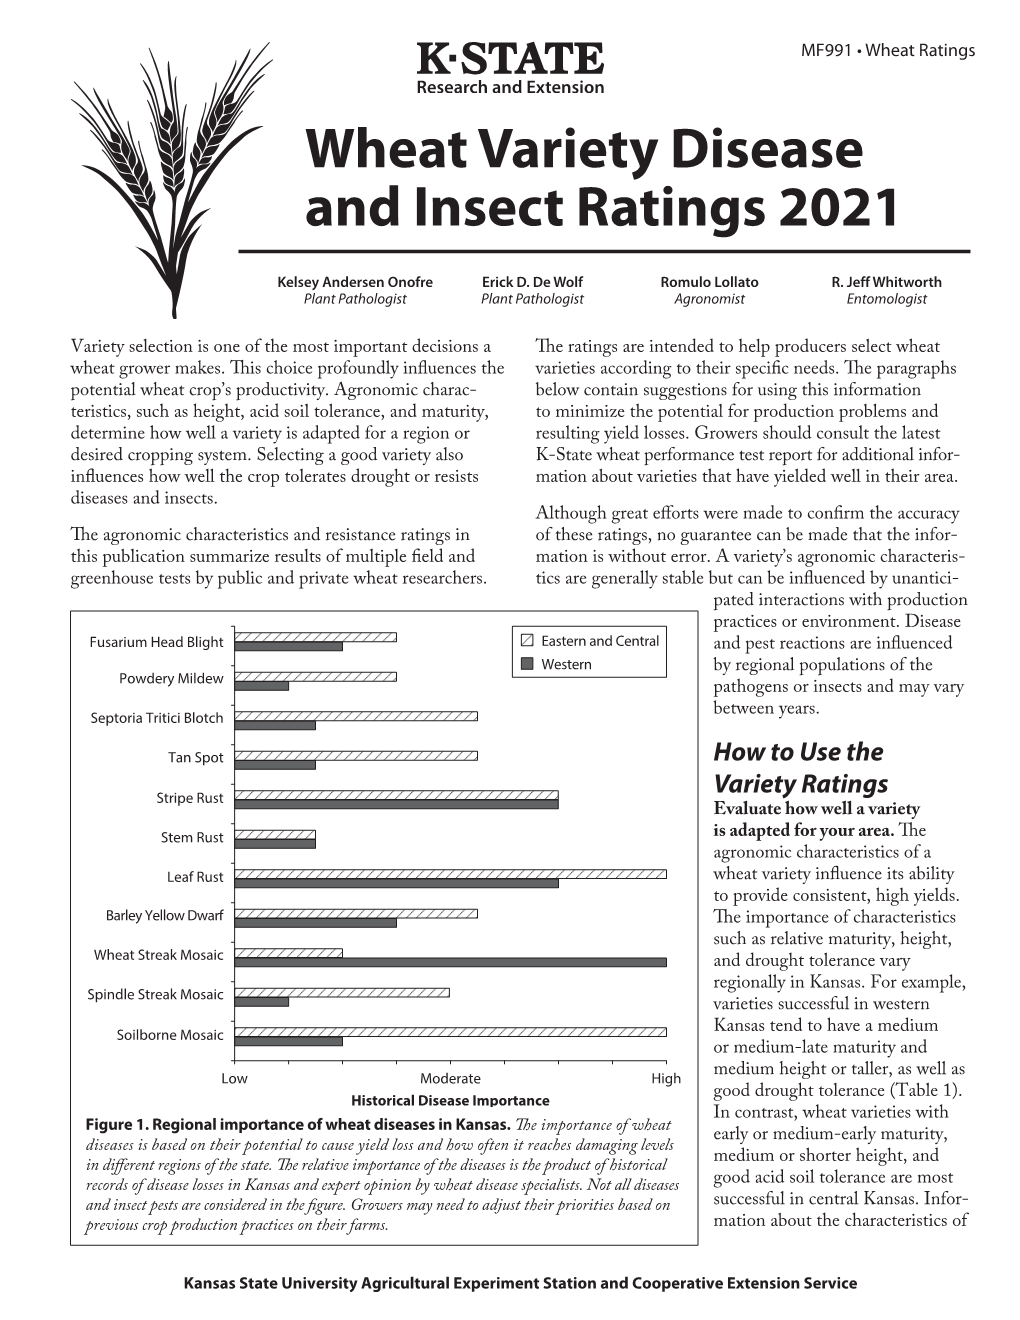 Wheat Variety Disease and Insect Ratings 2021